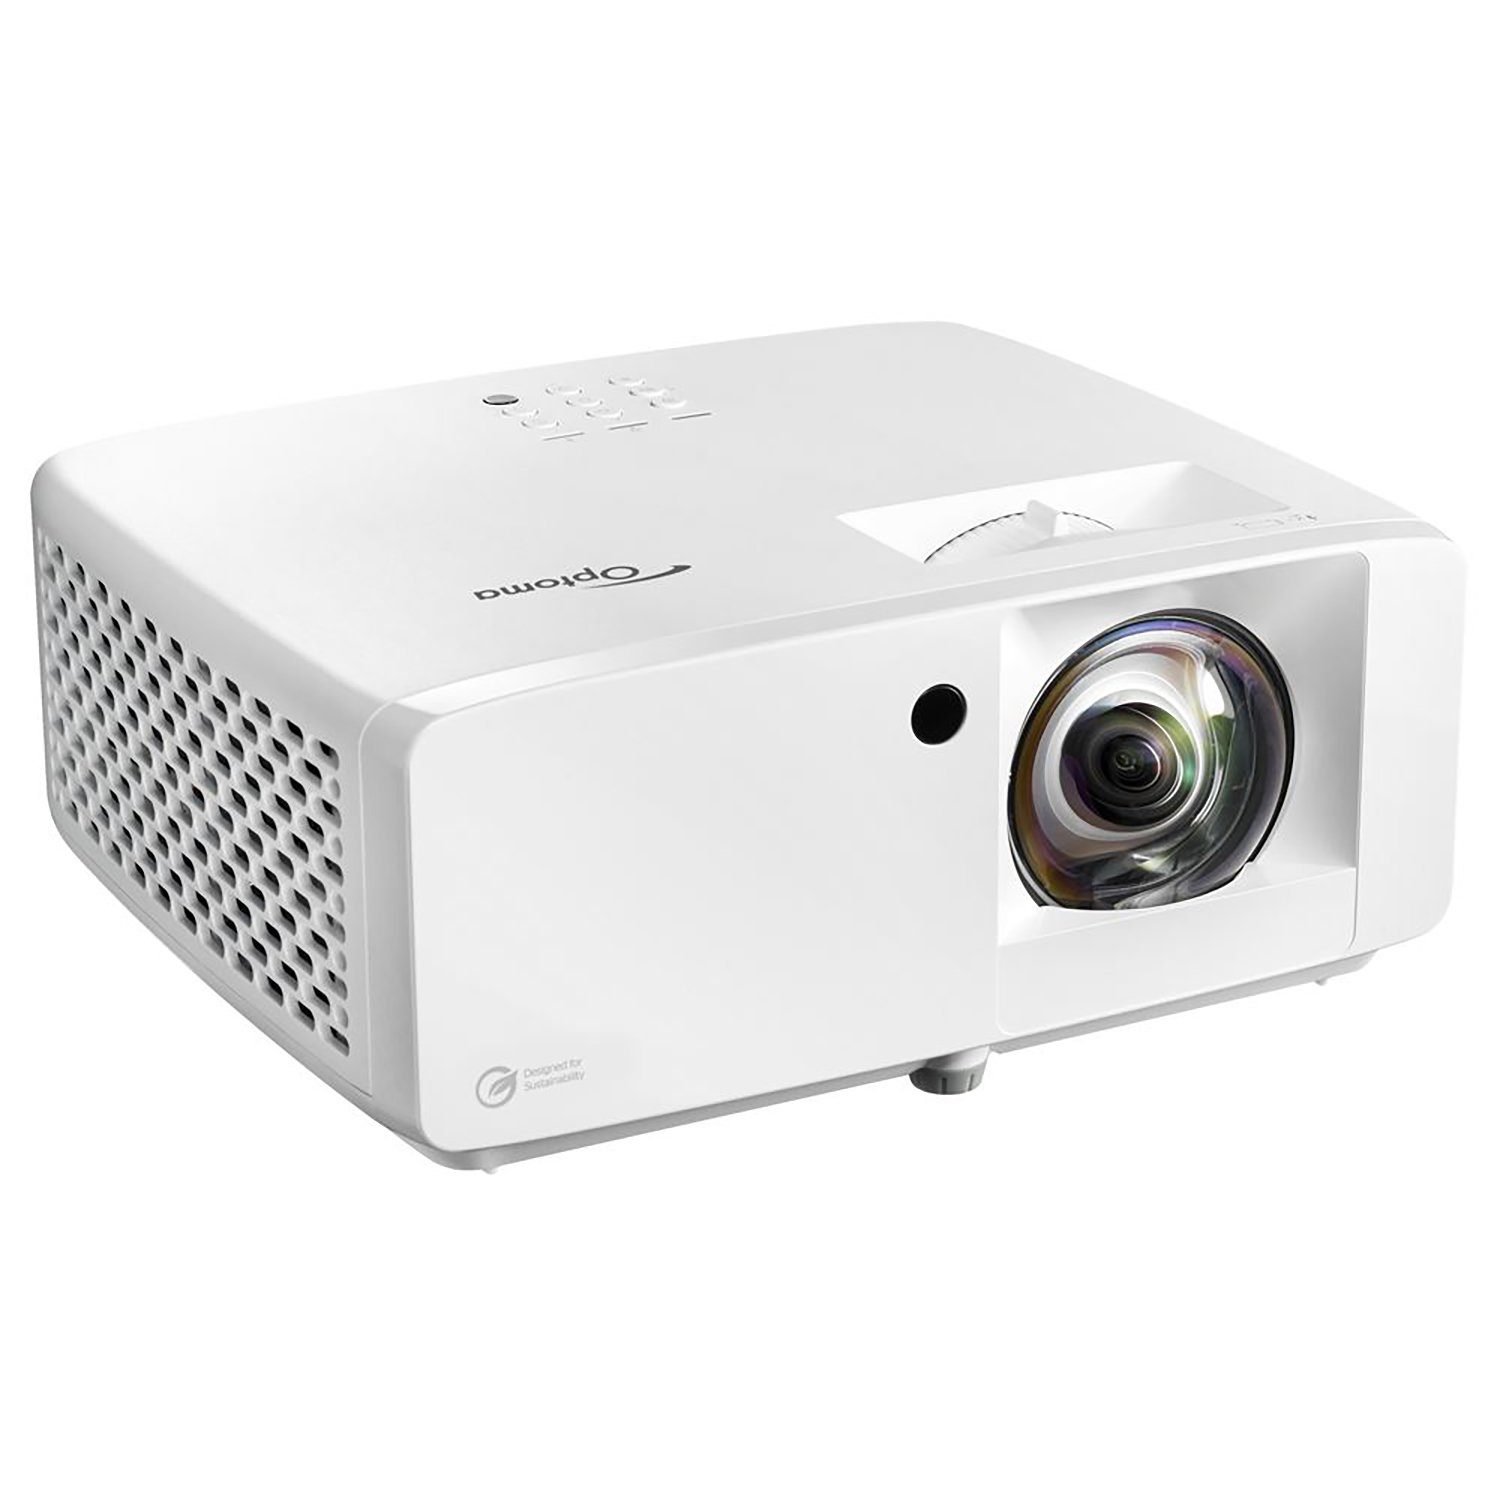 Optoma GT2100HDR x 1920 (4200 1080 3D-Beamer lm, 2000000:1, px)